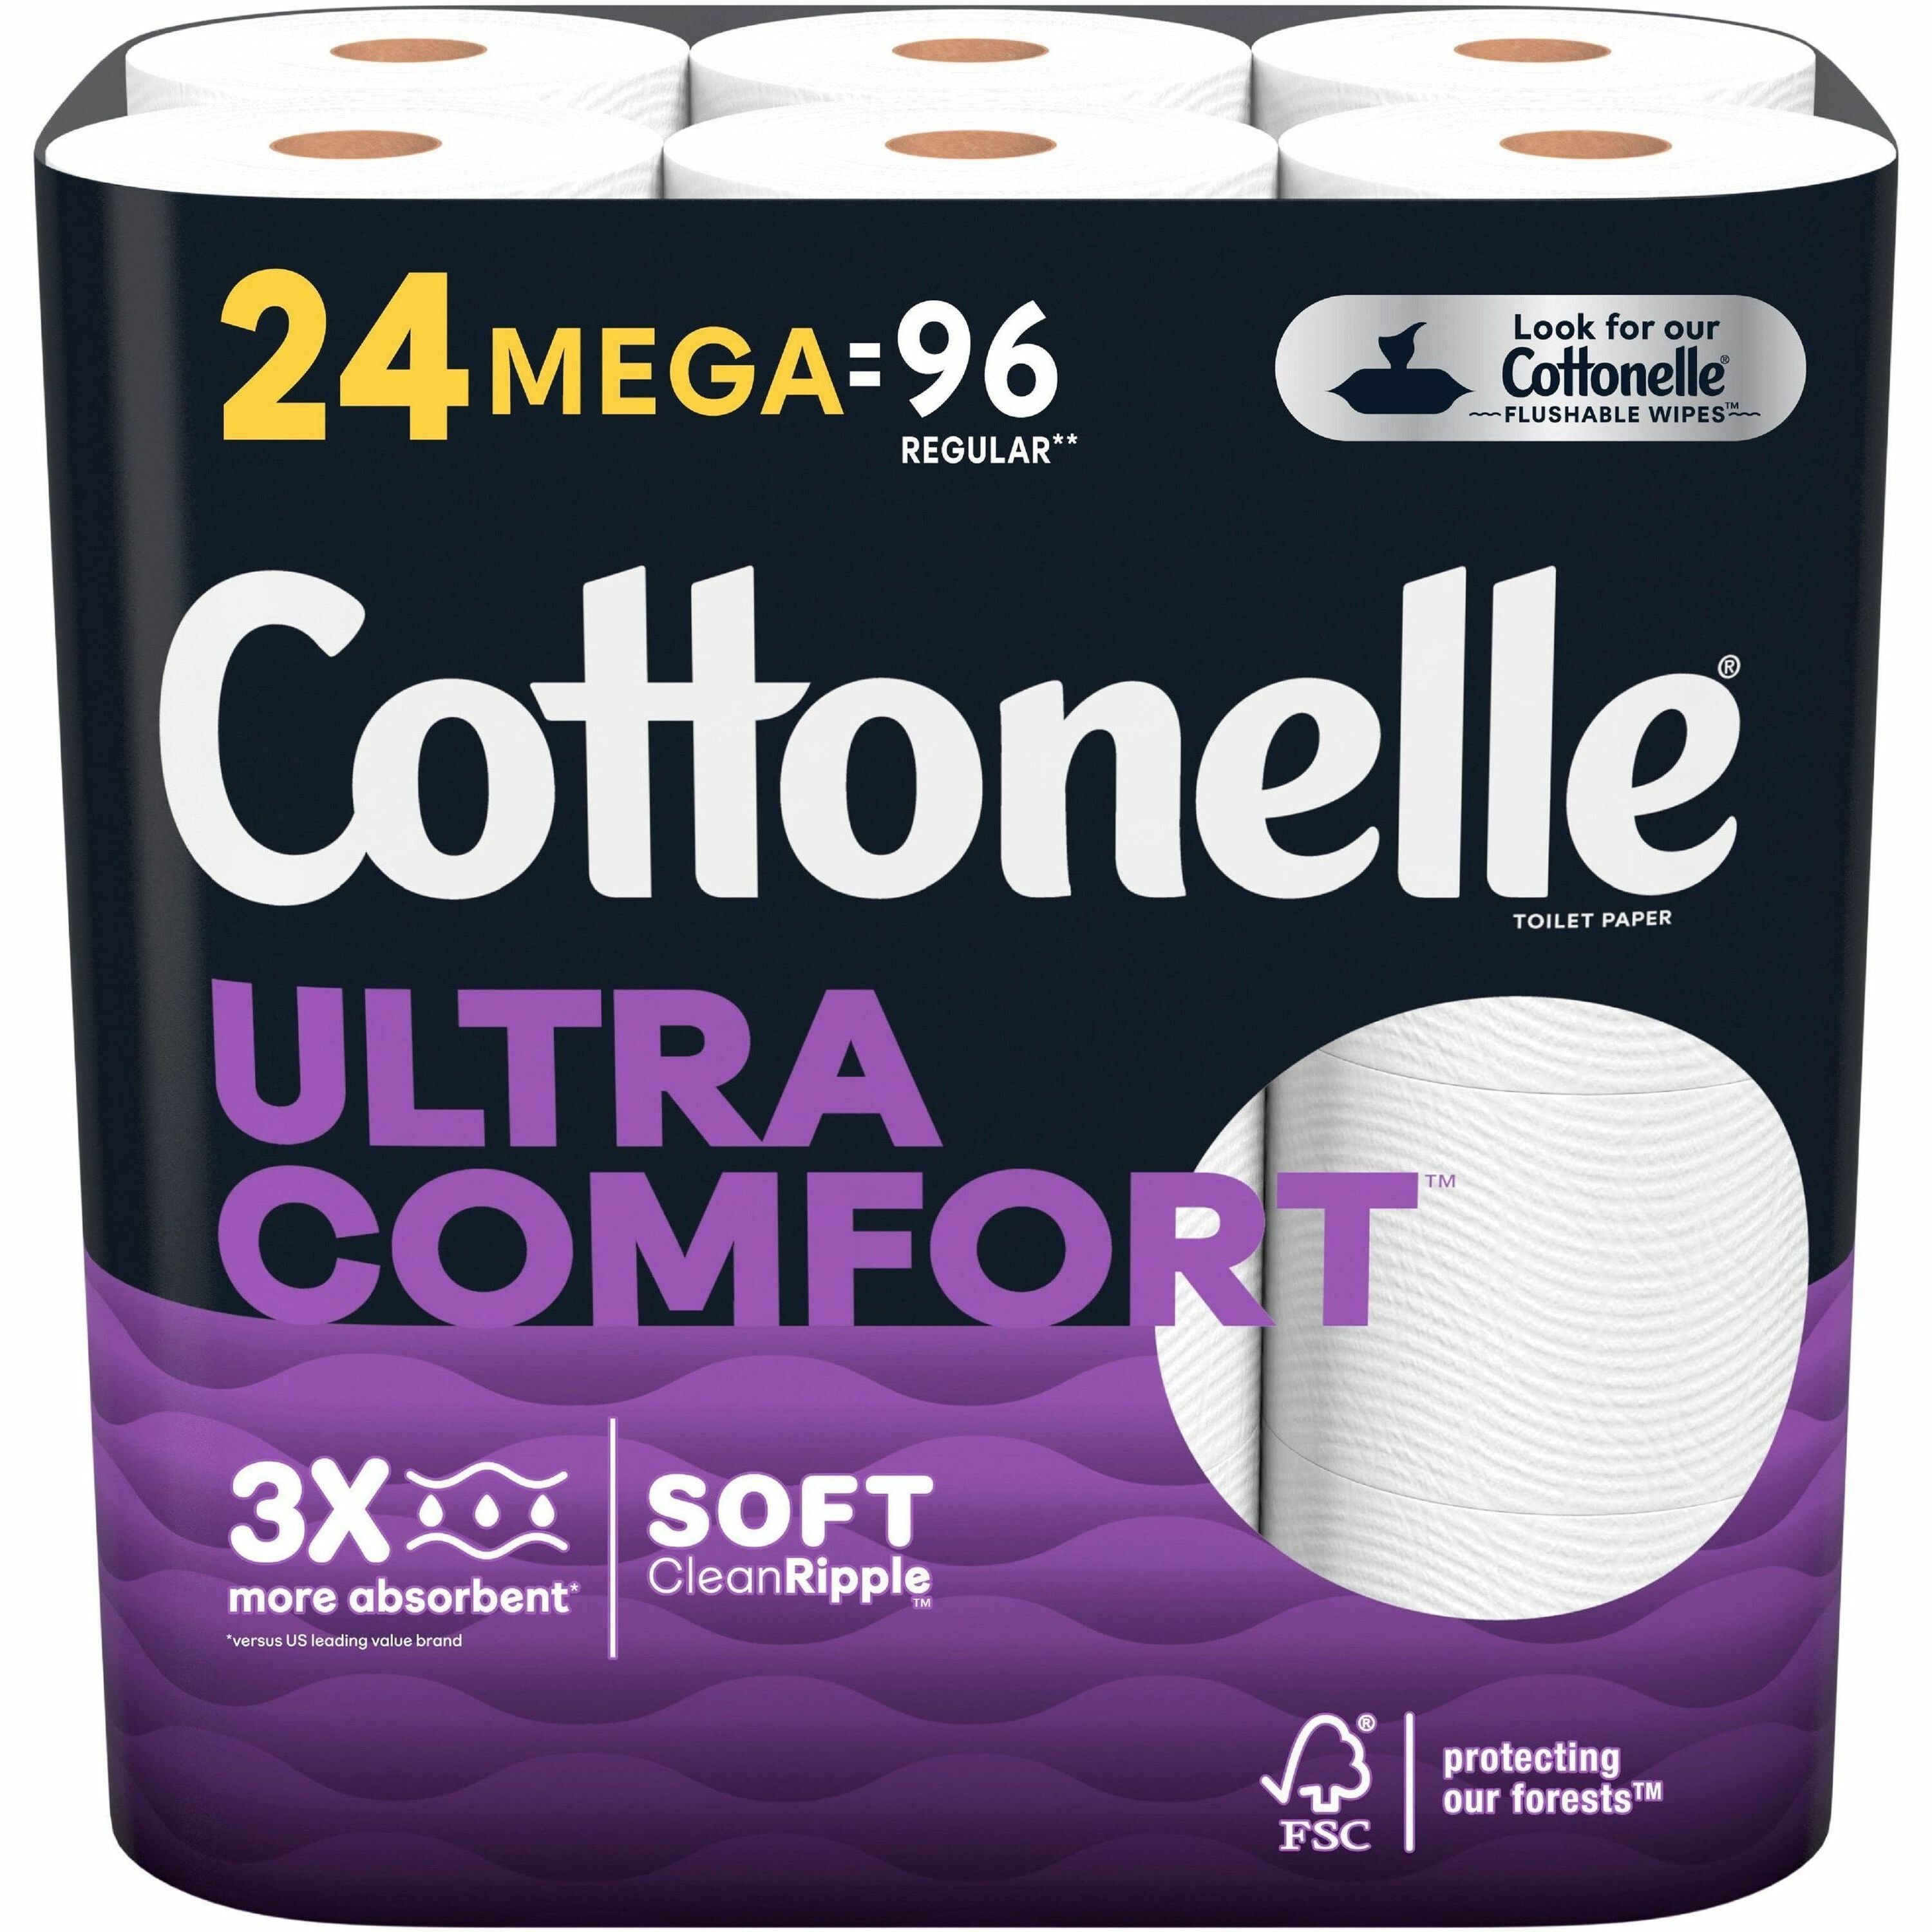 cottonelle-ultra-comfort-toilet-paper-2-ply-268-sheets-roll-white-fiber-moisture-absorbent-septic-safe-sewer-safe-chemical-free-dye-free-flushable-clog-safe-thick-paraben-free-fragrance-free-for-toilet-24-pack_kcc54174 - 1